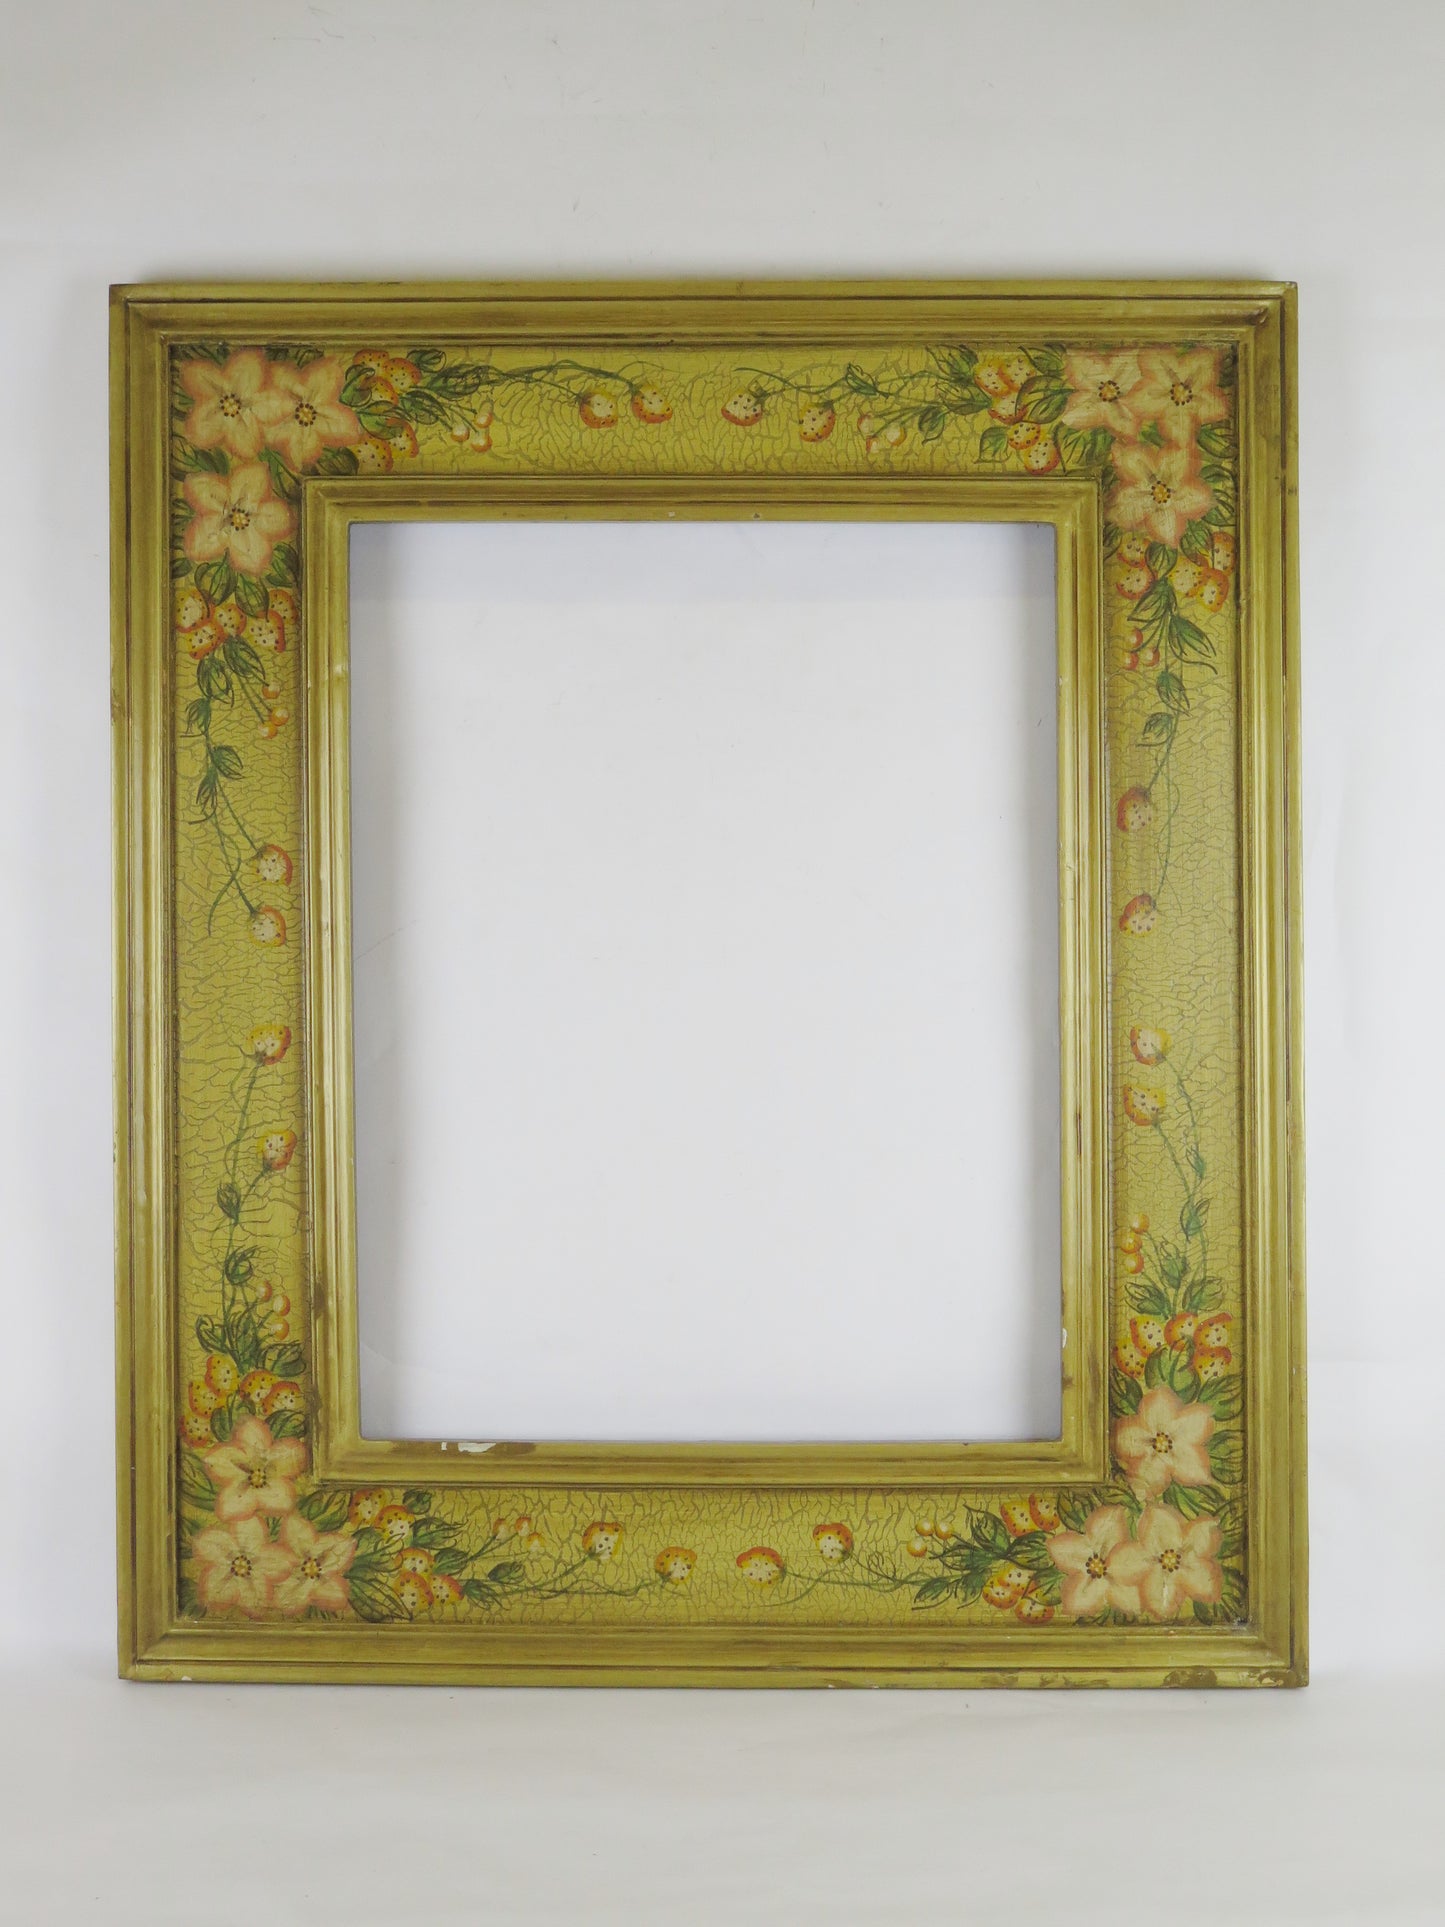 50x39 cm FRAME FOR VINTAGE PAINTINGS IN WOOD PAINTED WITH VEGETABLE PATTERNS BA.COR